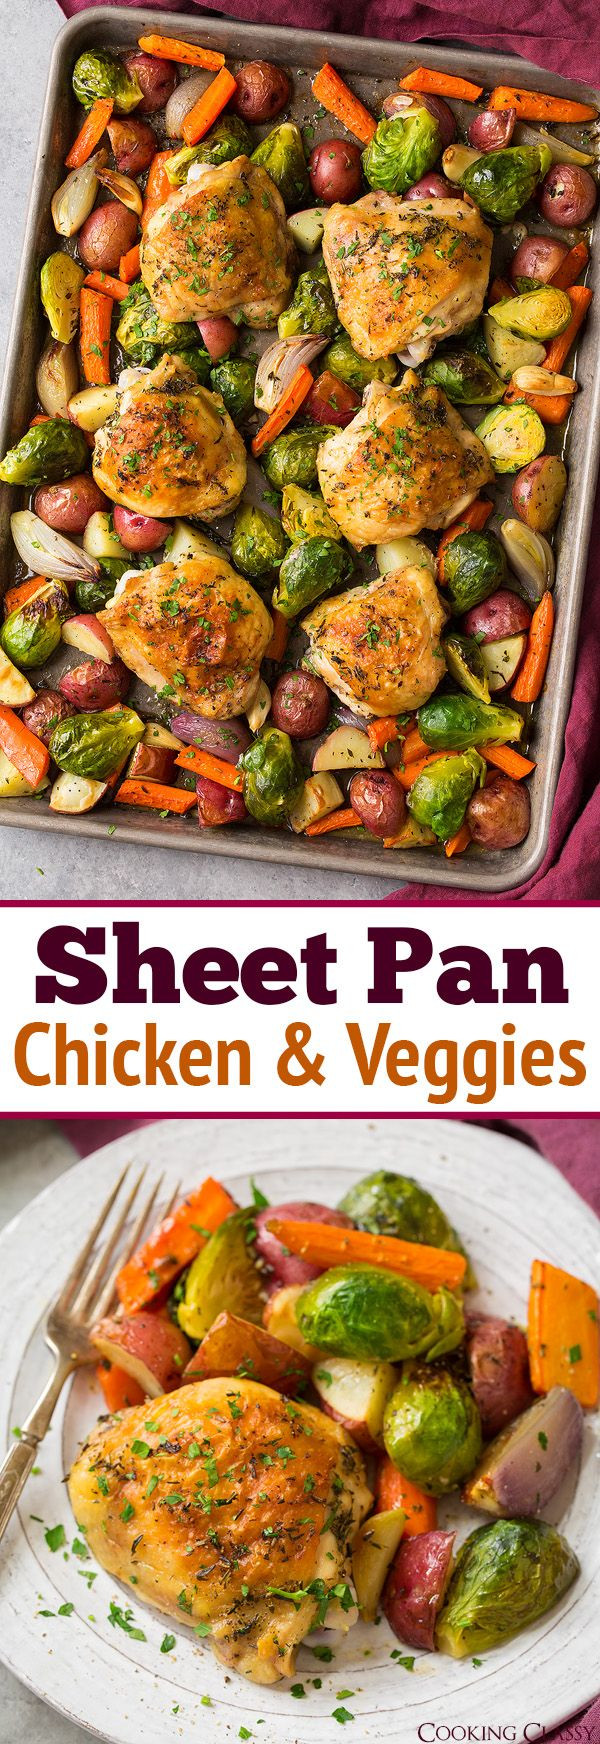 Ree Drummond Sheet Pan Dinners
 1000 images about dinner on Pinterest